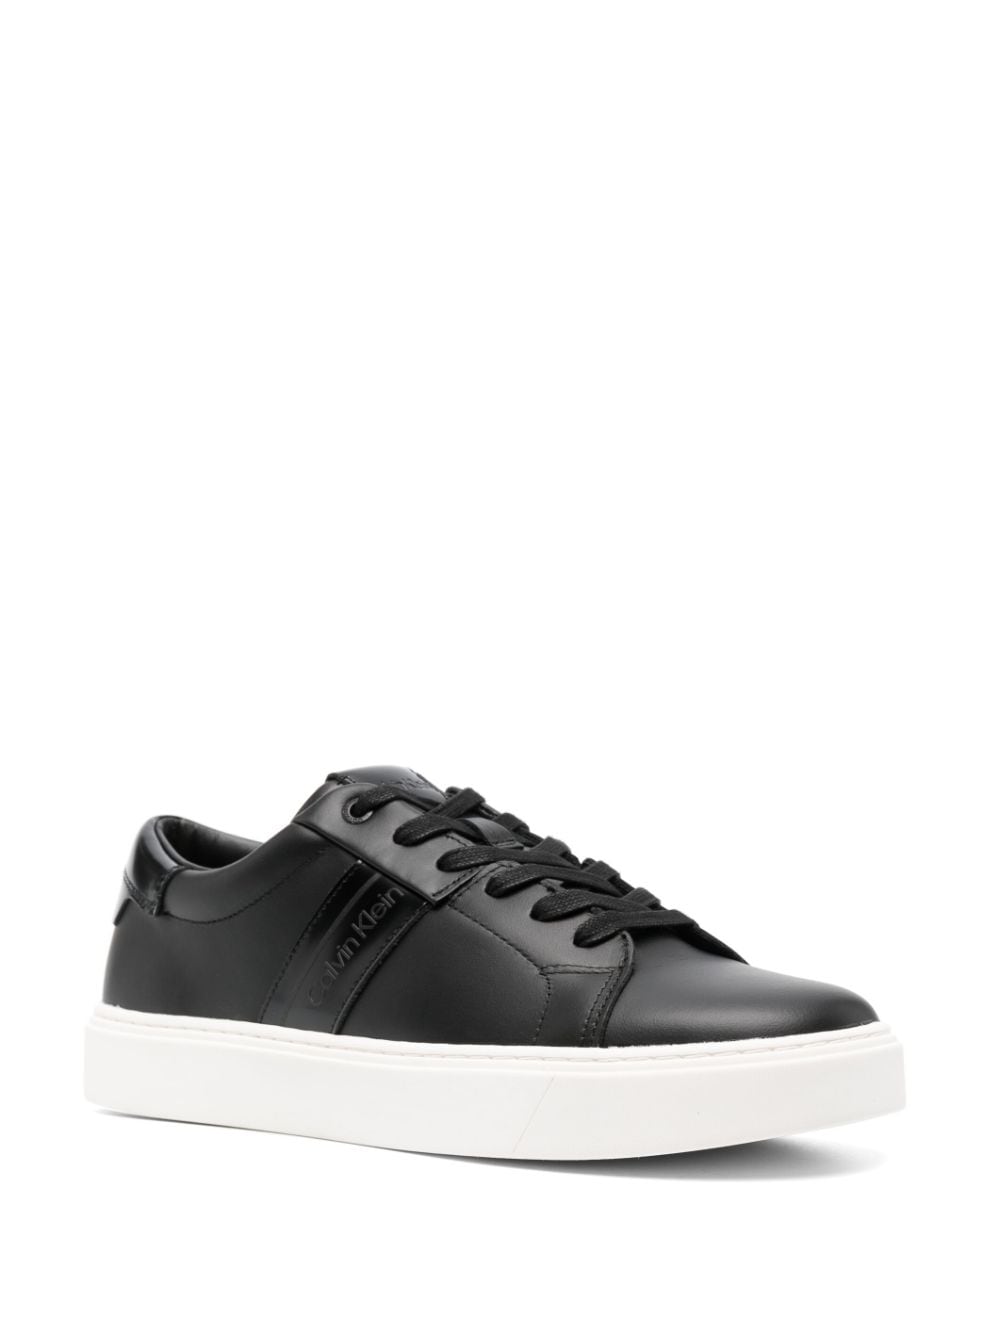 Image 2 of Calvin Klein leather low-top sneakers